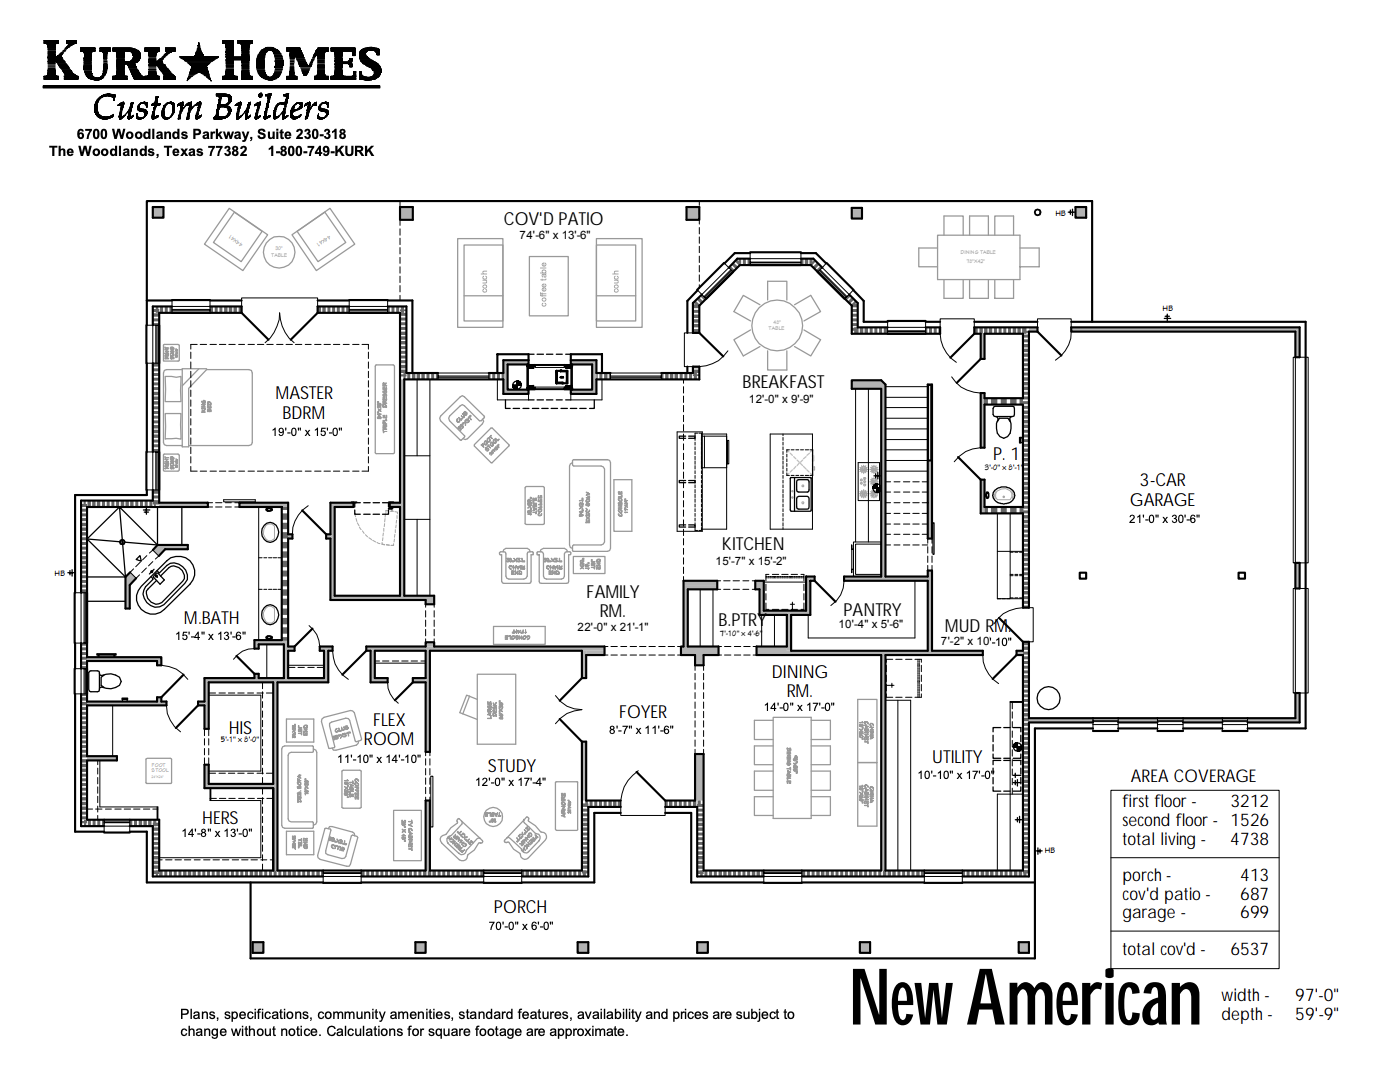 The New American - Home Plan Design